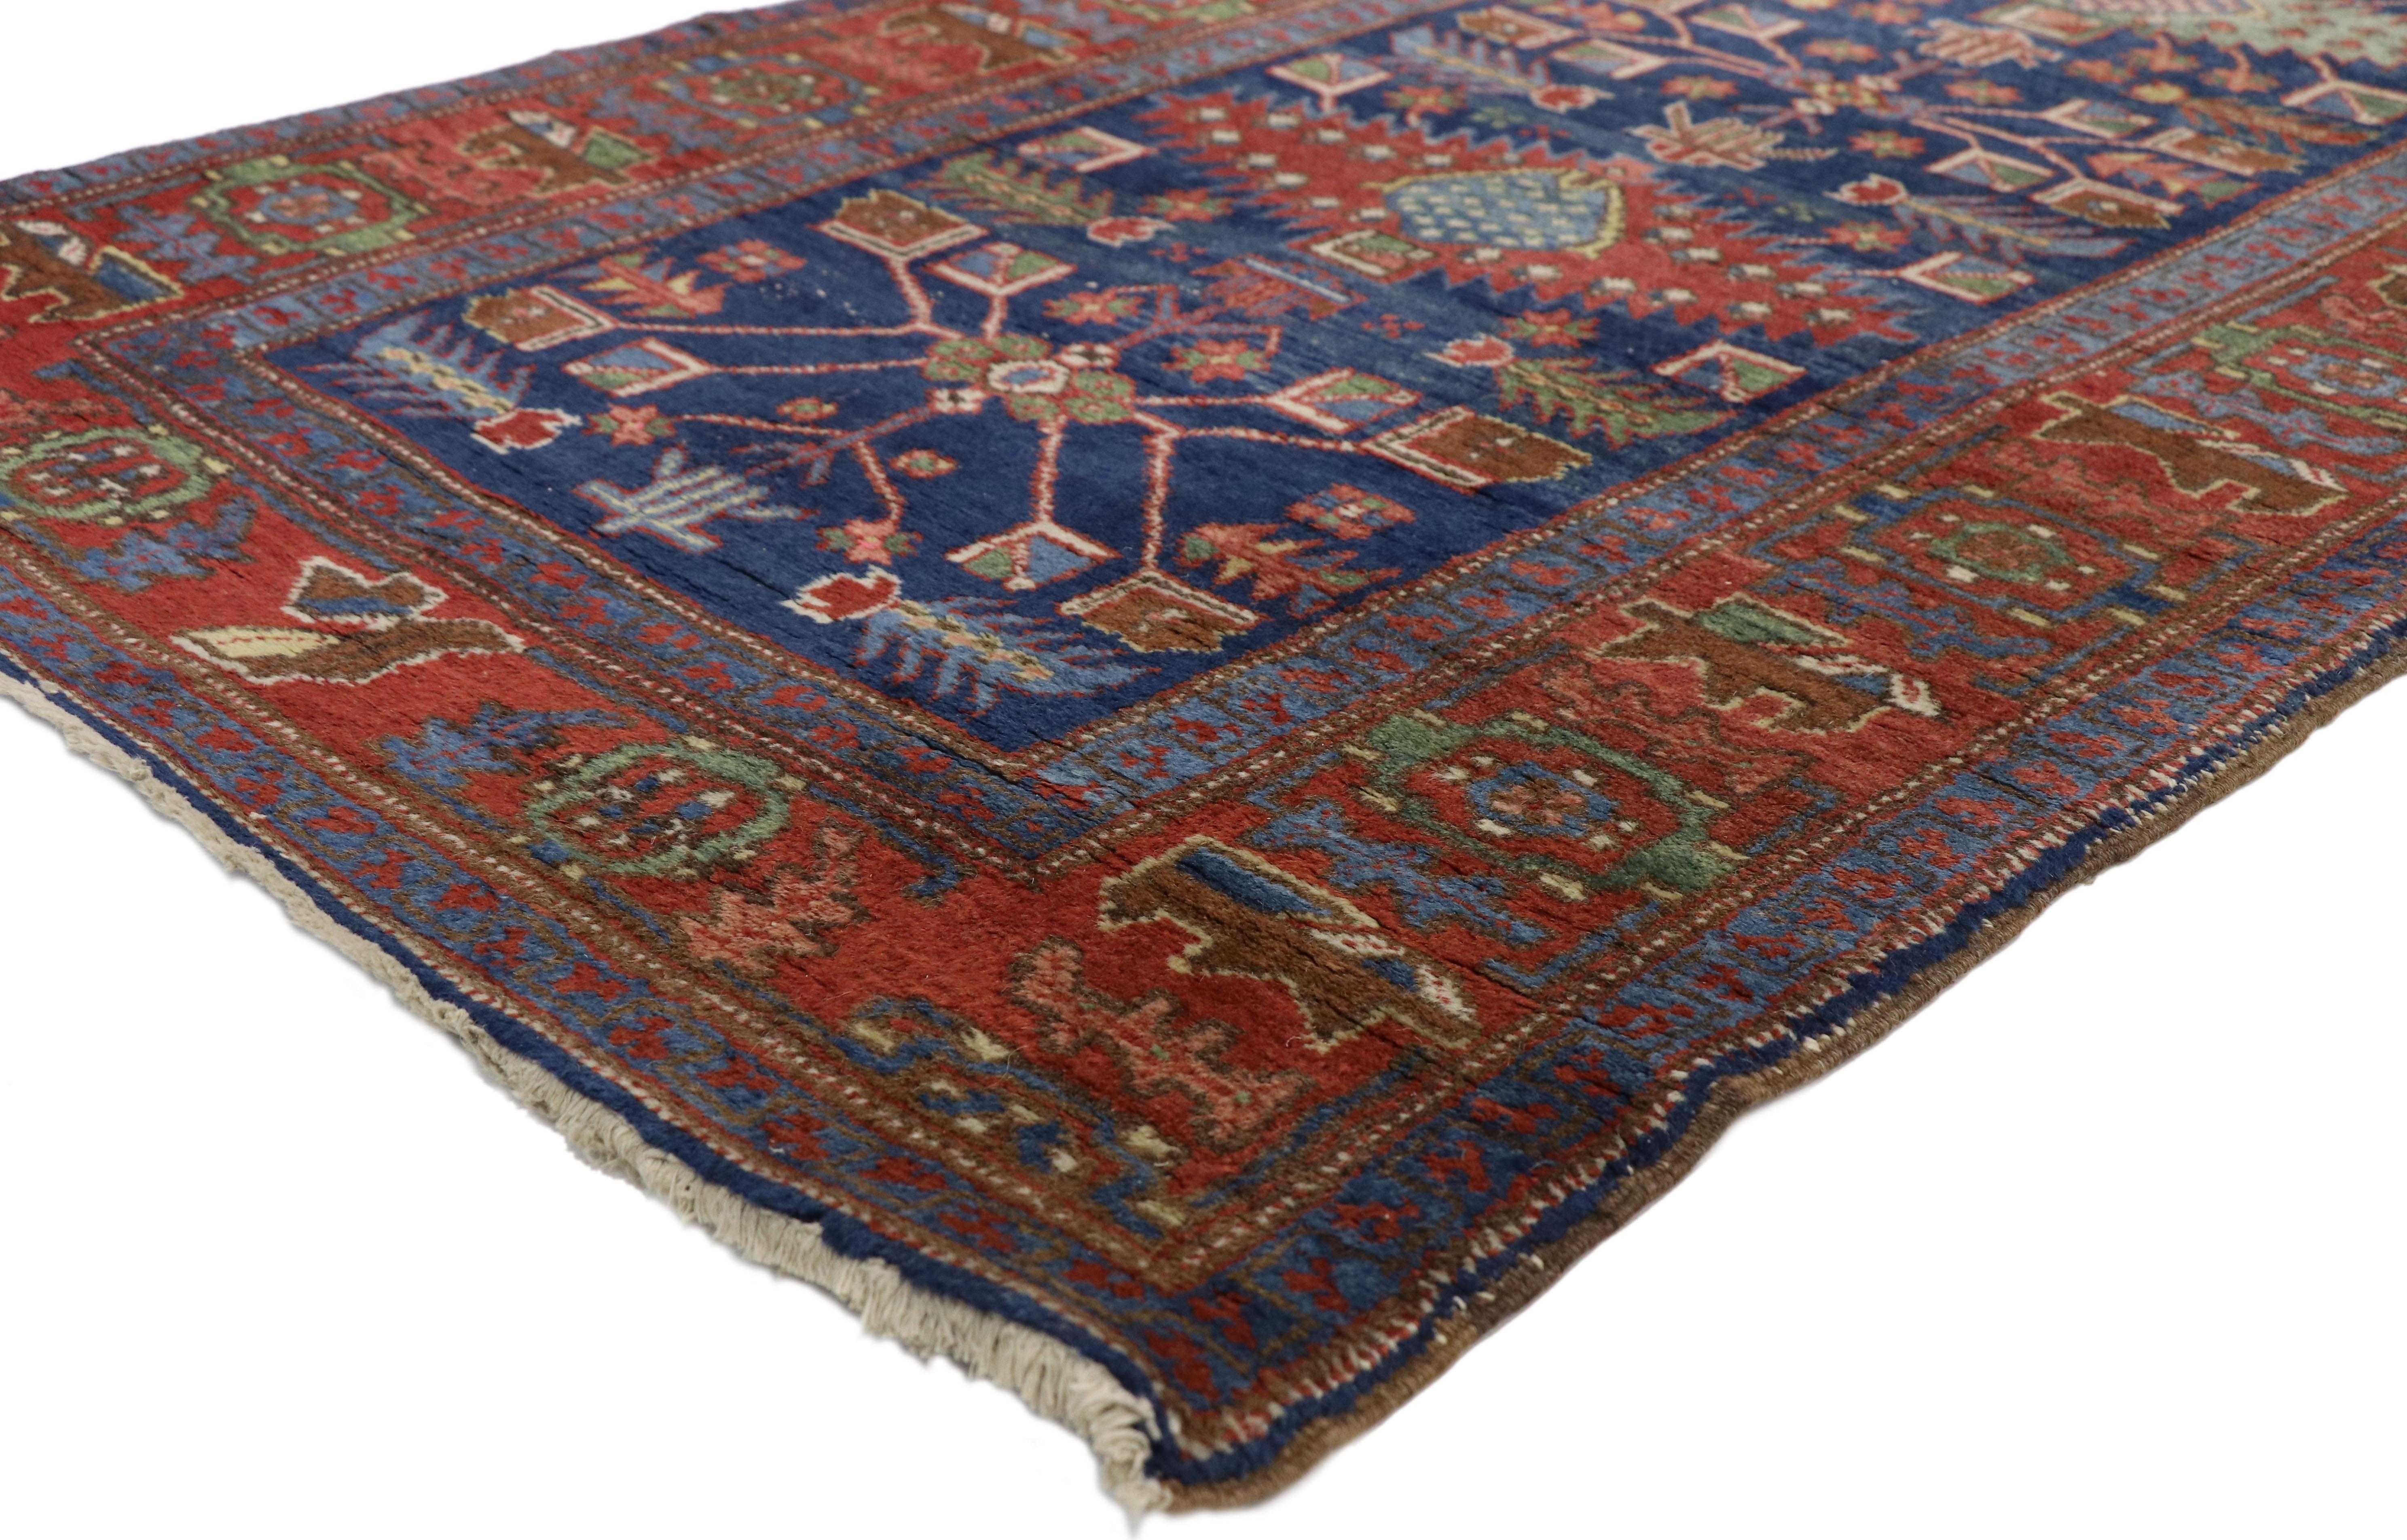 77053 Antique Persian Heriz Karaja Runner with Modern Art Deco Tribal Style, Extra-Long Hallway Runner 03'03 x 17'03. This hand knotted wool antique Persian Karaja Heriz runner features a column of distinctive medallions and amulets similar to those